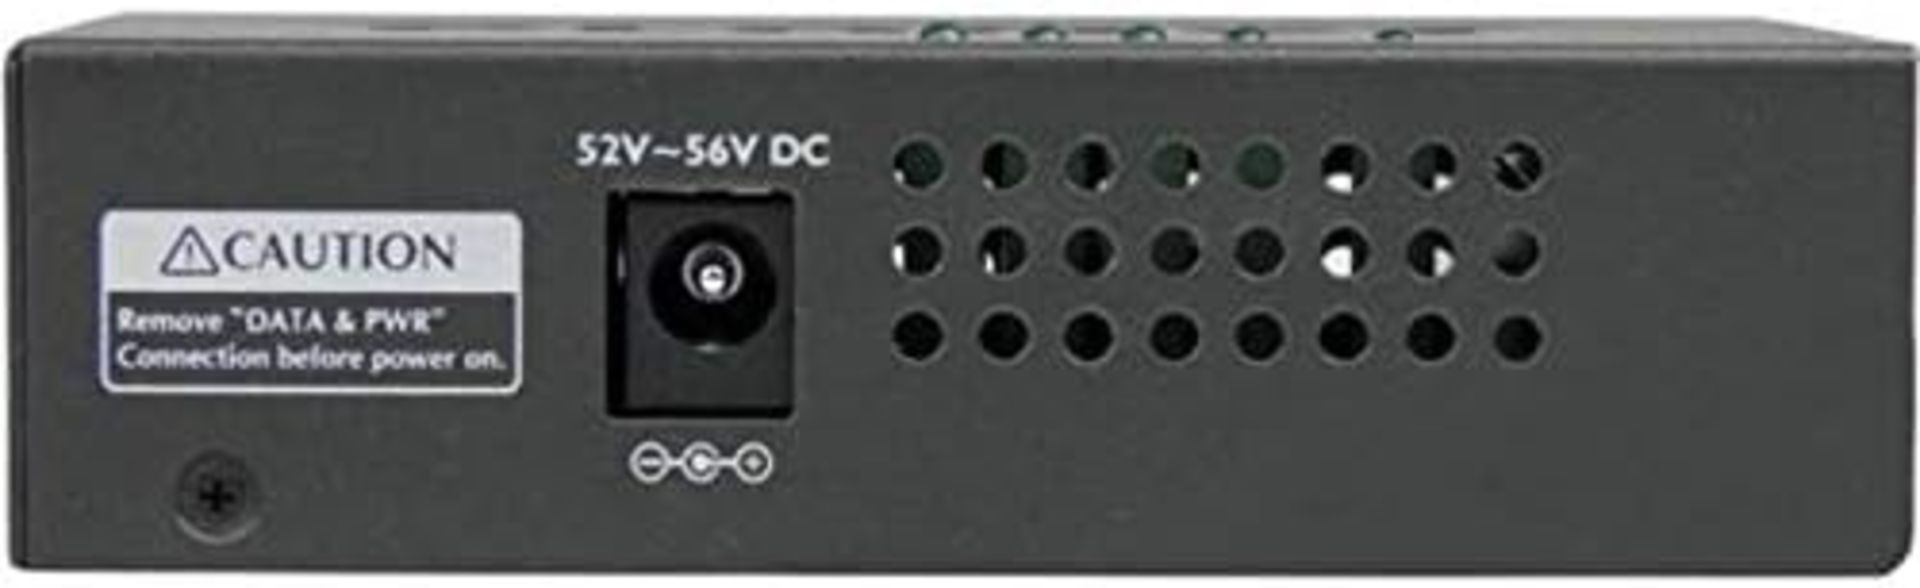 STARTECH 4 Port Gigabit Midspan - PoE+ Injector. RRP £208. More power, with less cost and hassle. - Bild 4 aus 5